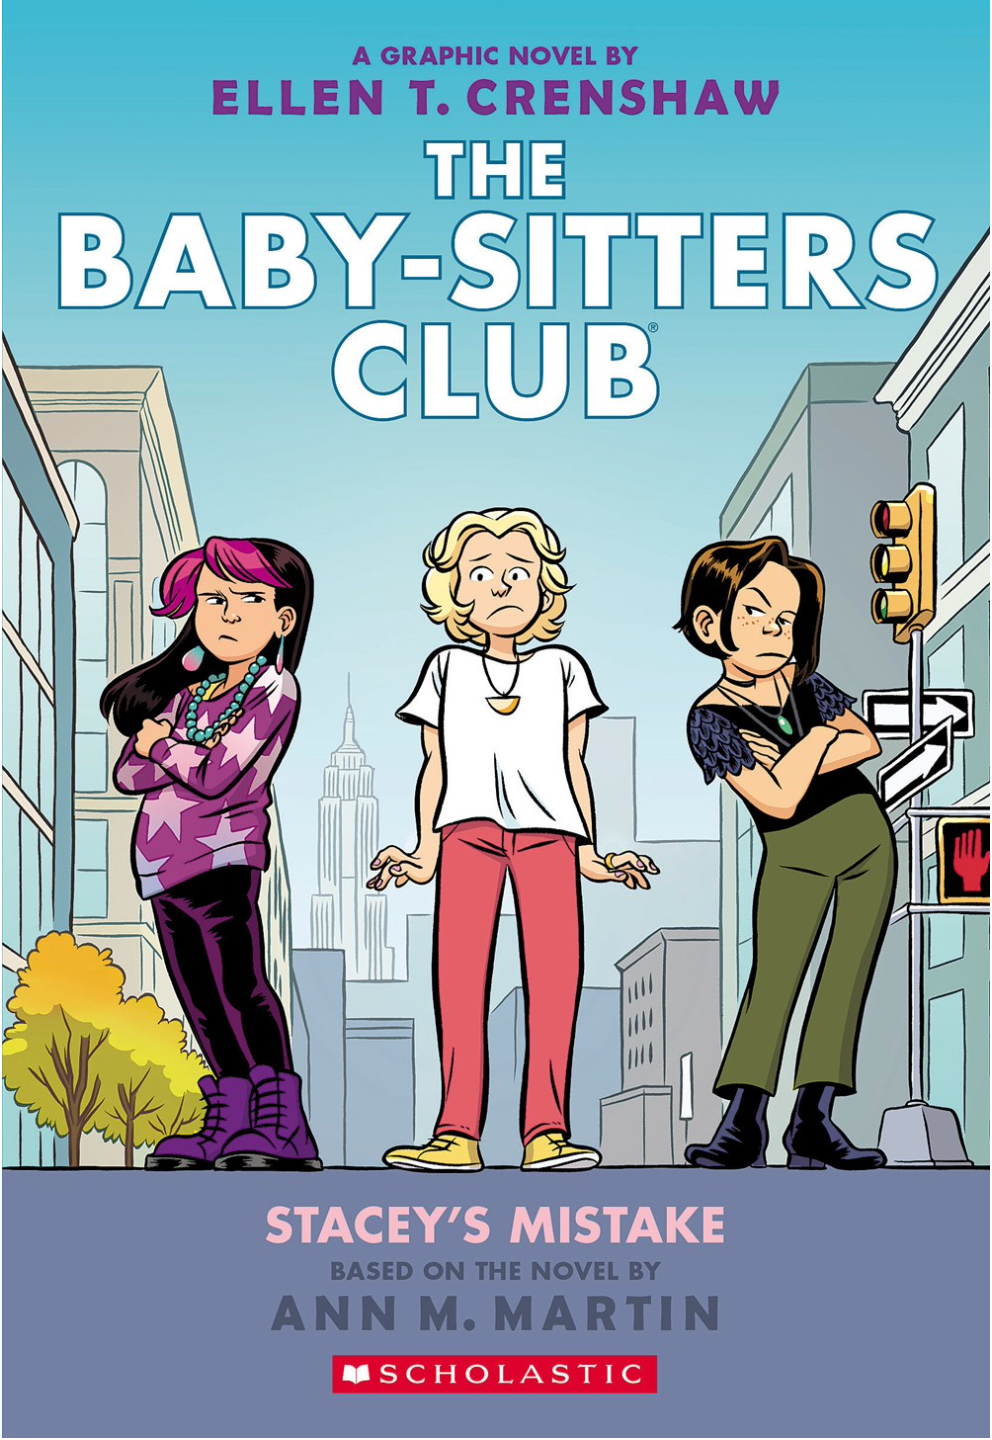 Stacey's Mistake: A Graphic Novel (The Baby-Sitters Club #14)